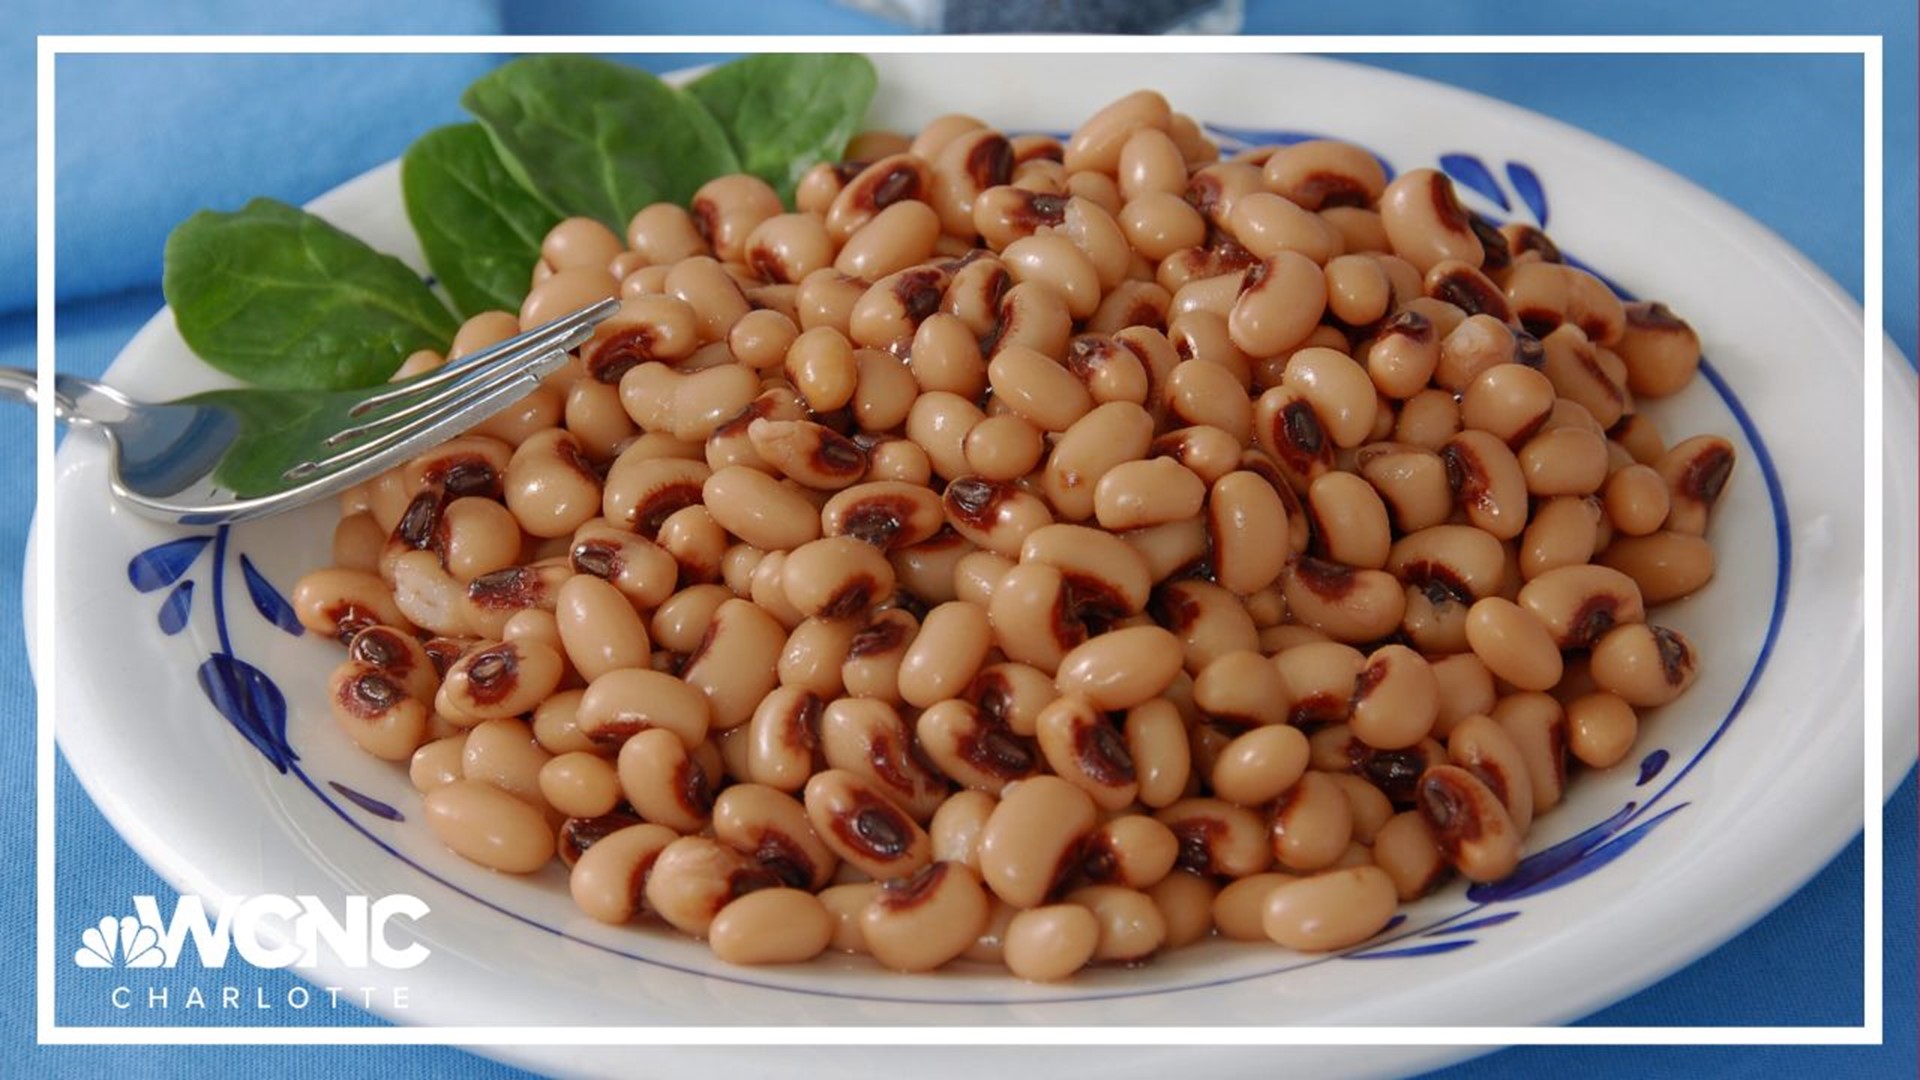 WCNC's Kayland Hagwood shares the tradition of black-eyed peas on New Year's Day.